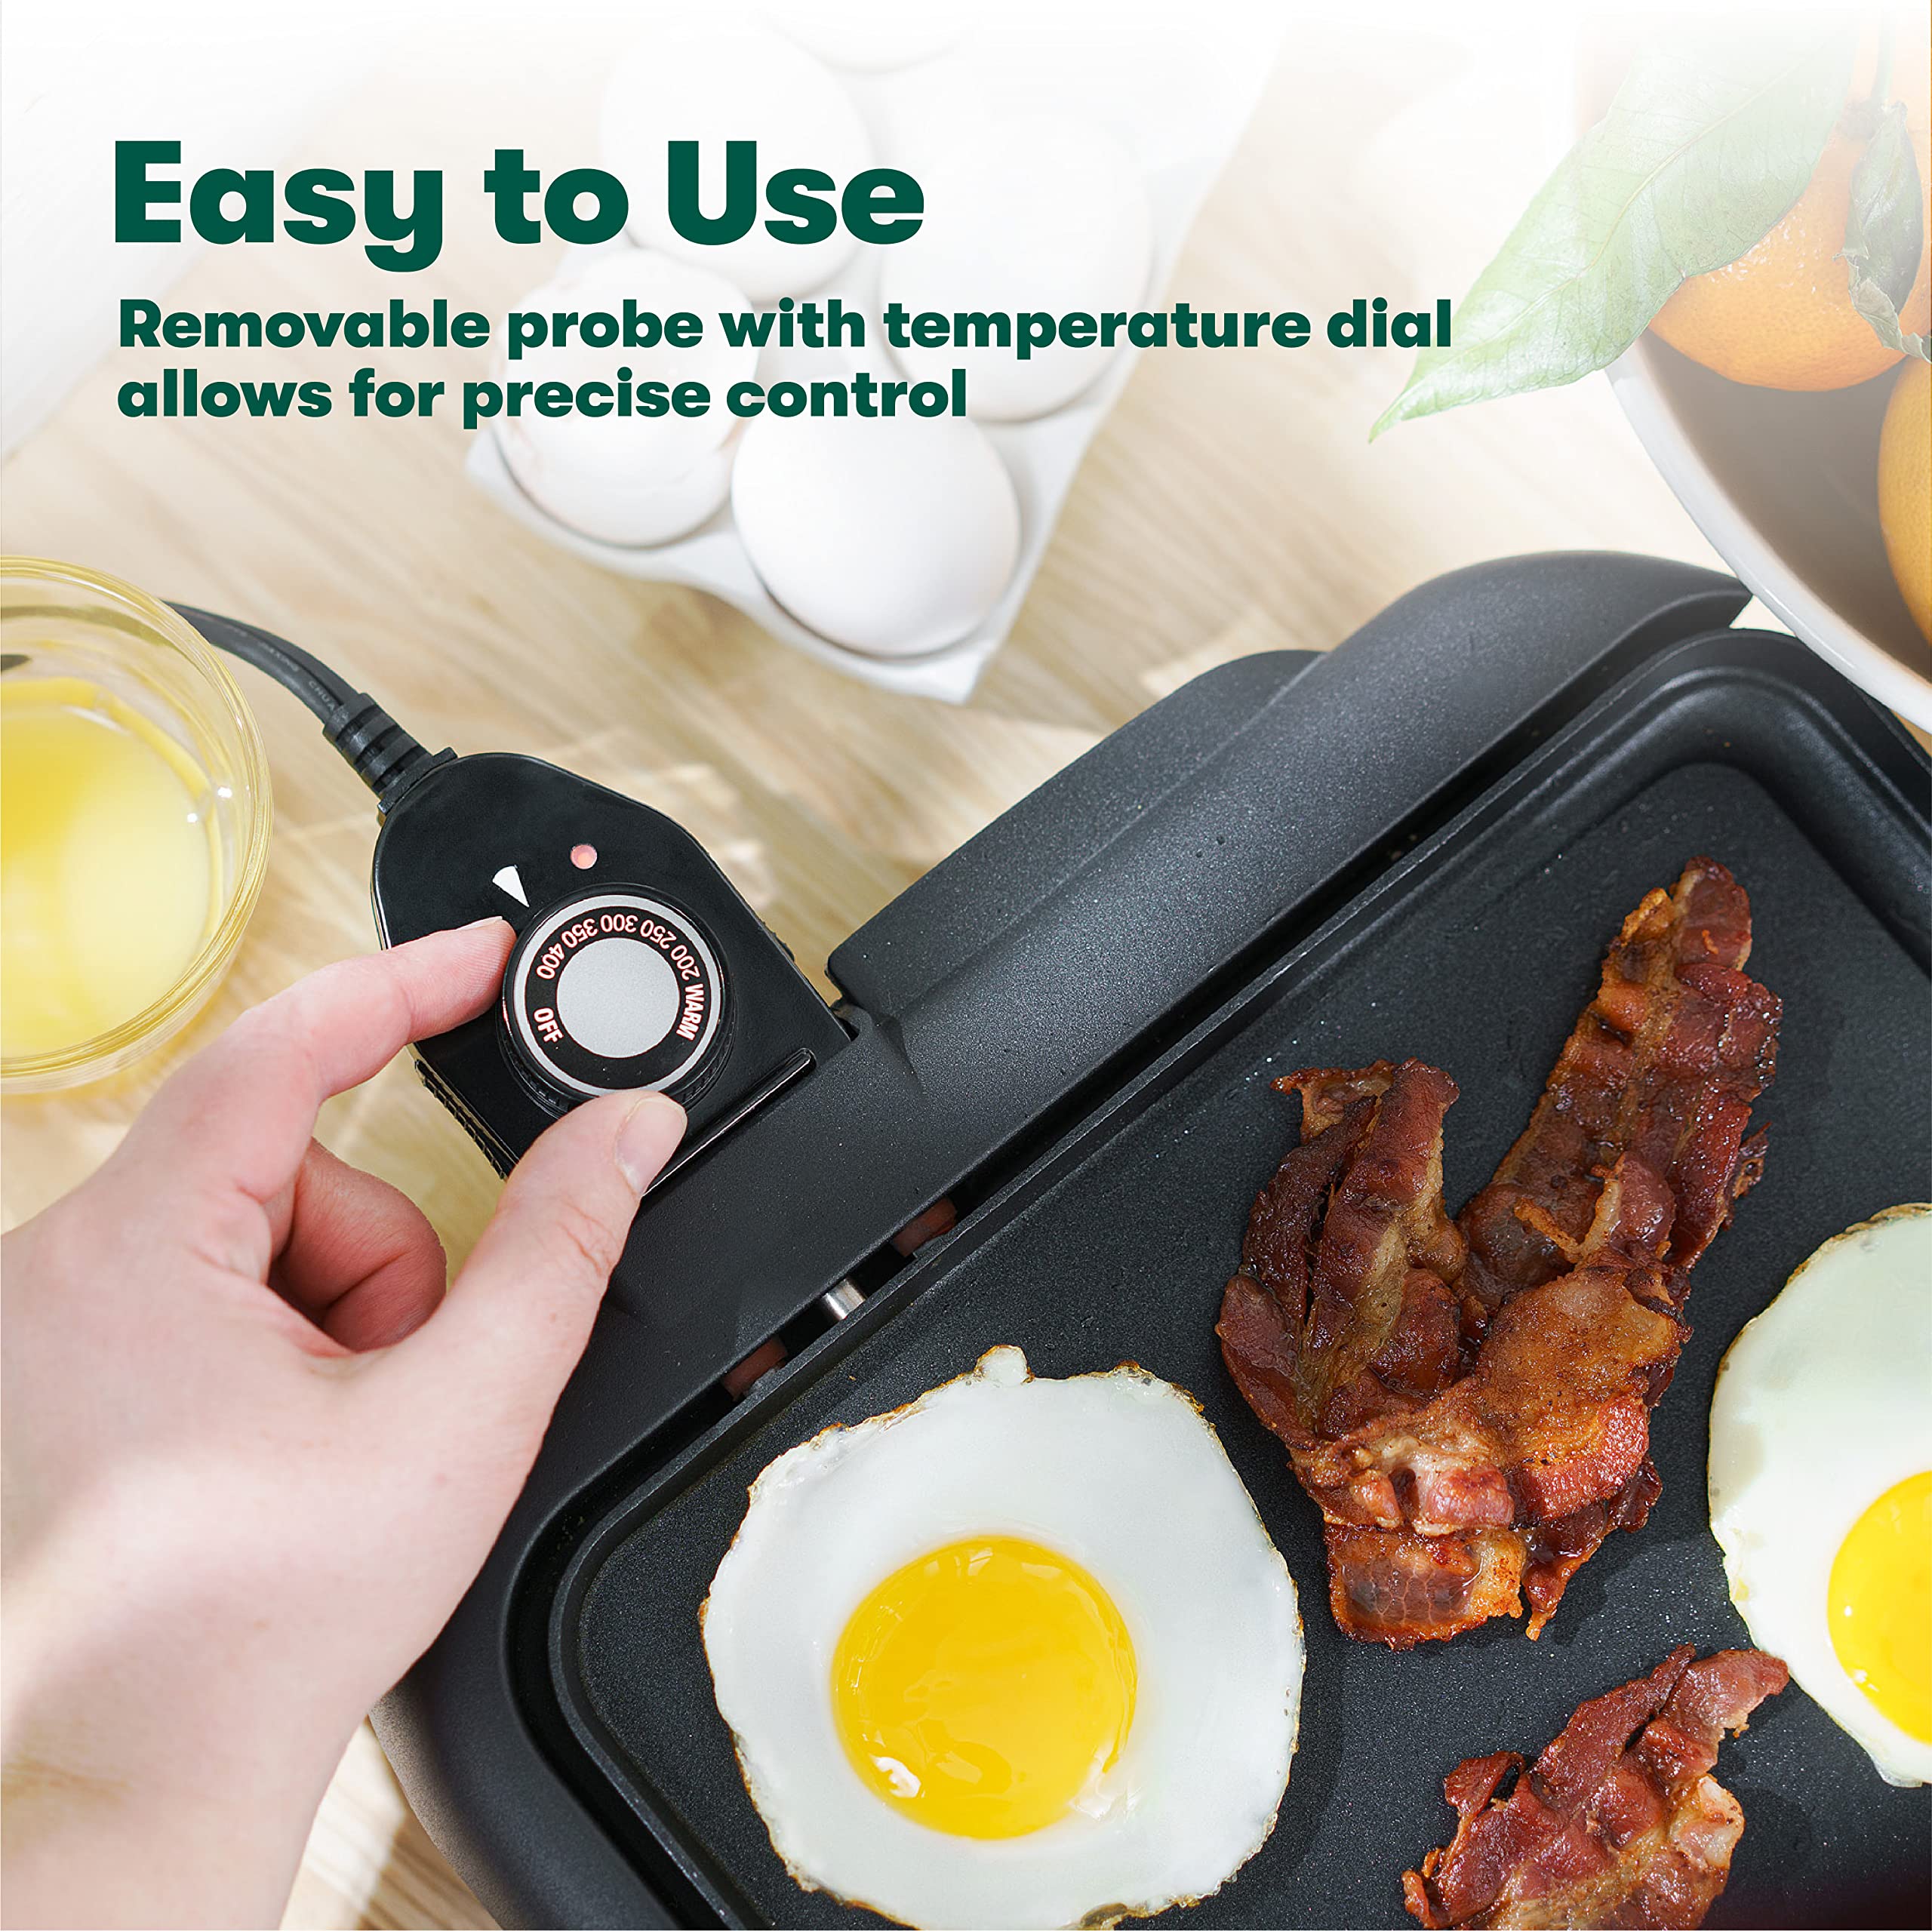 BELLA Electric Griddle with Warming Tray - Smokeless Indoor Grill, Nonstick Surface, Adjustable Temperature & Cool-touch Handles, 10